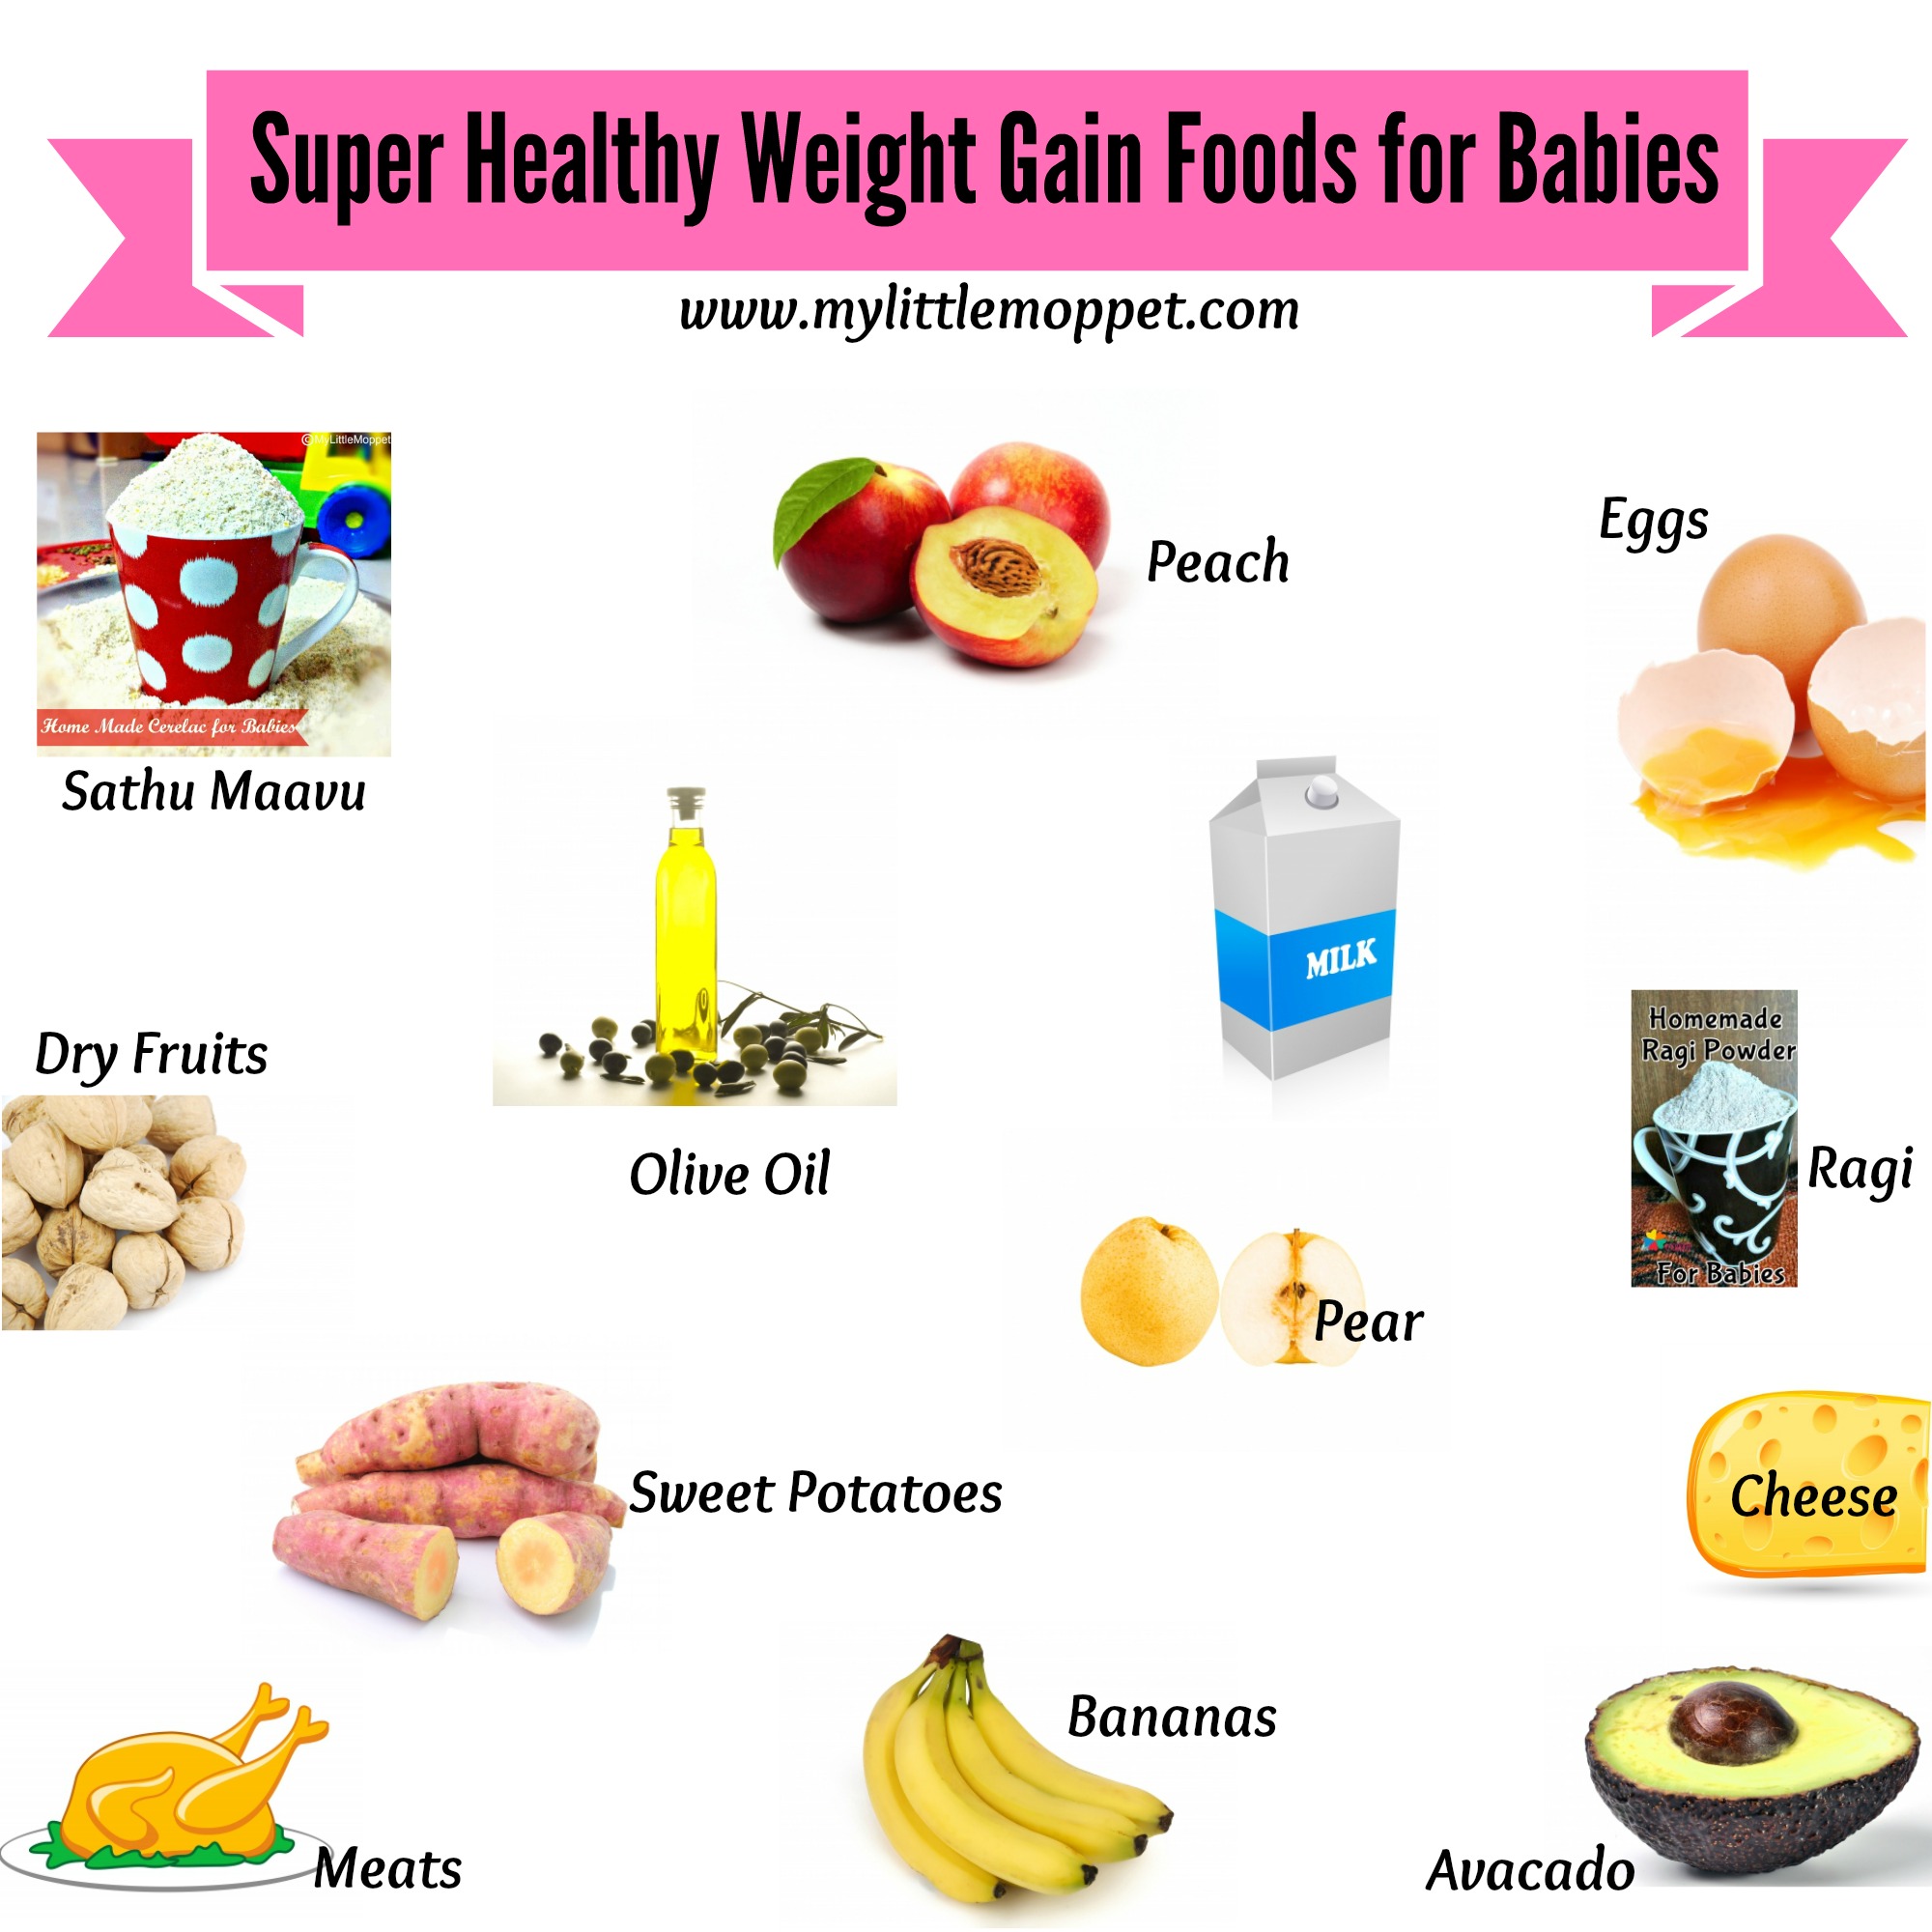 Super Healthy Weight Gain foods for babies - My Little Moppet